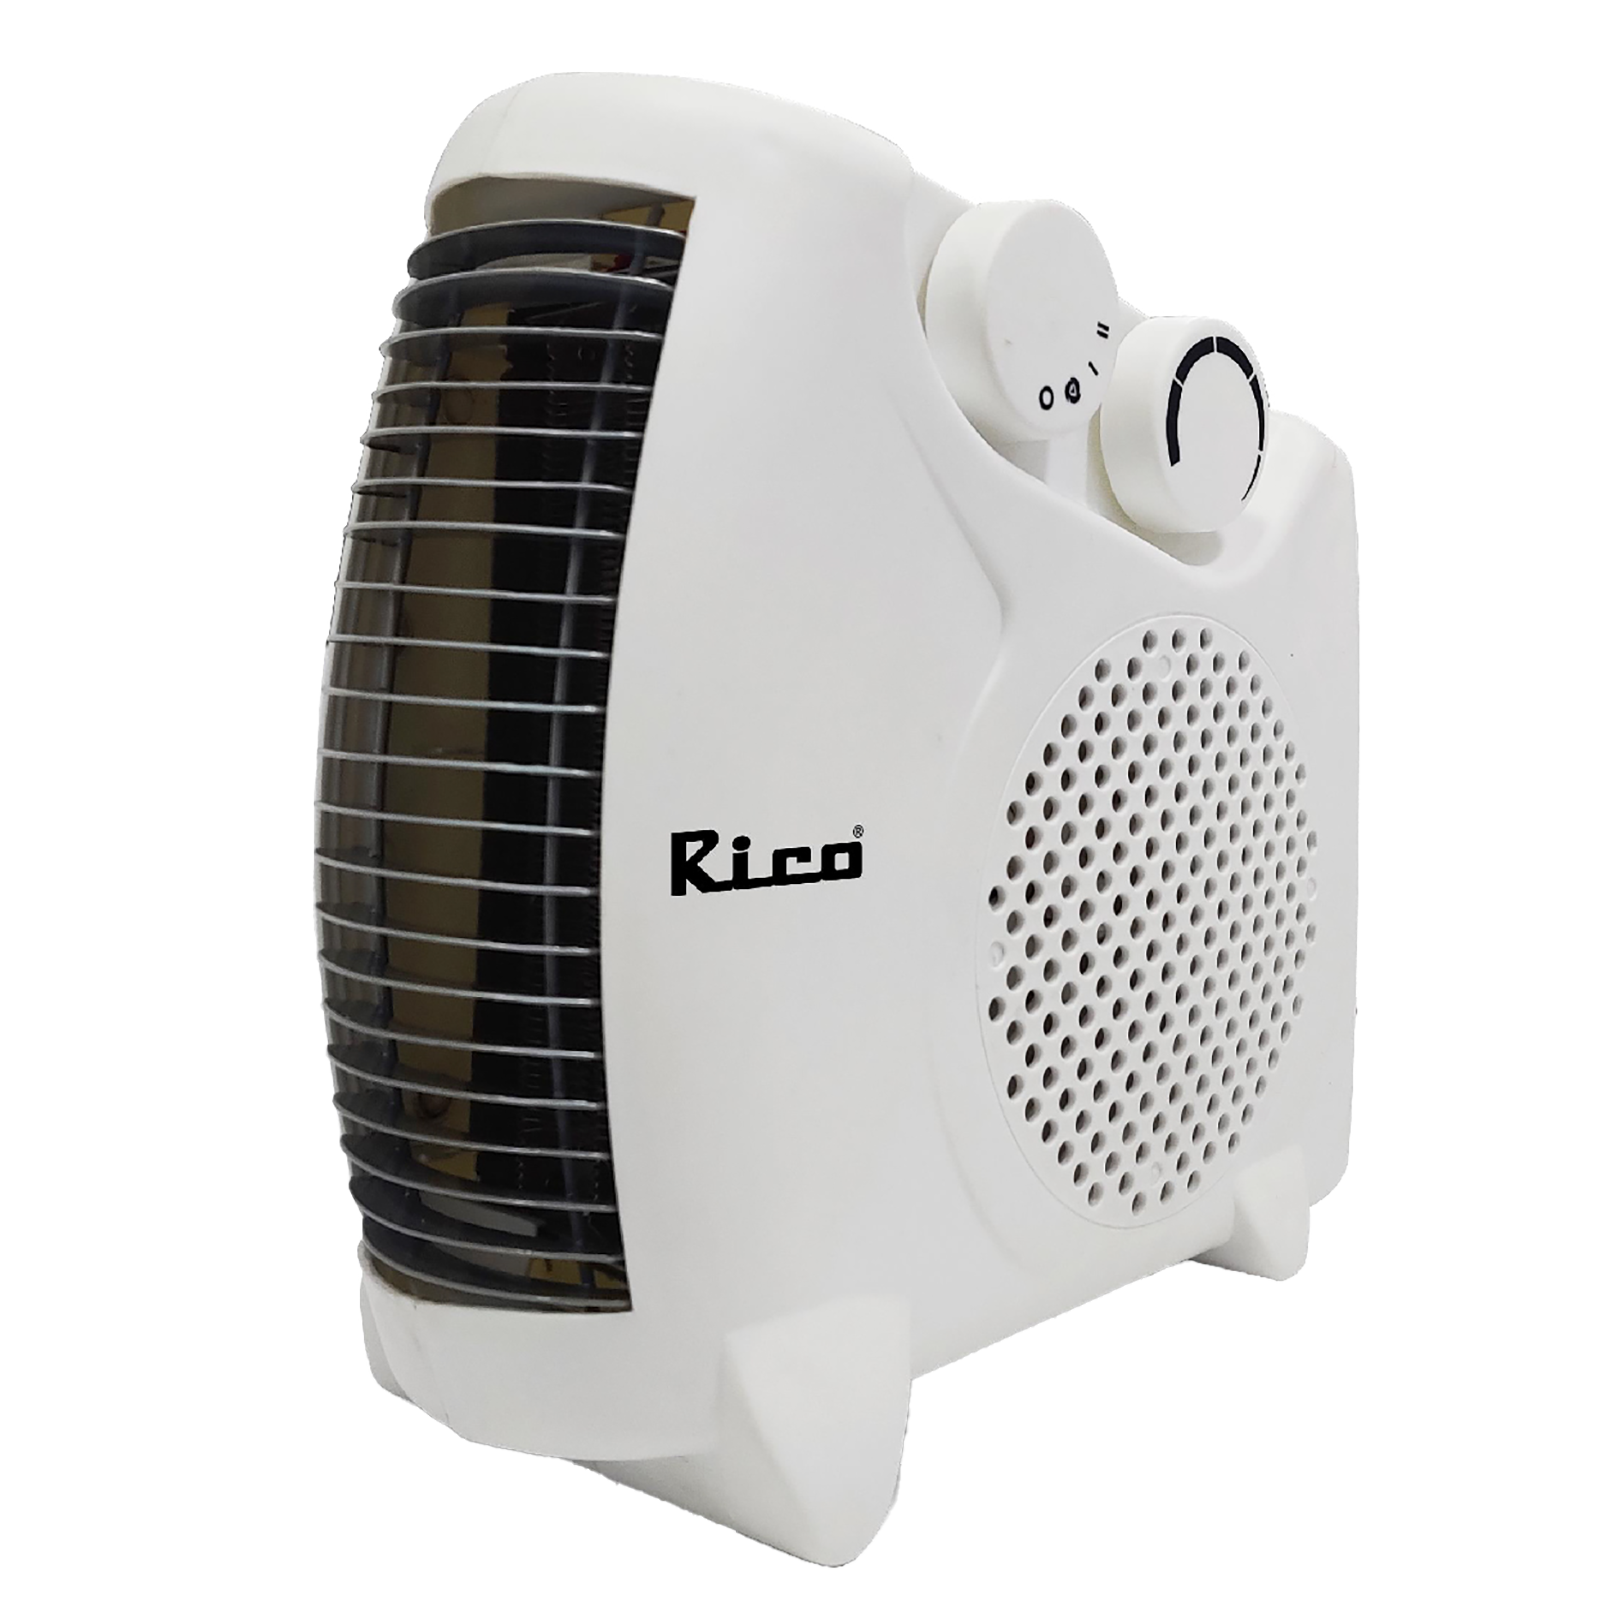 Rico ISI Certified 2000 Watts Room Heater With Japanese Fast Heating Technology and Free Replacement (Adjustable Thermostat Setting, RH1502, White)